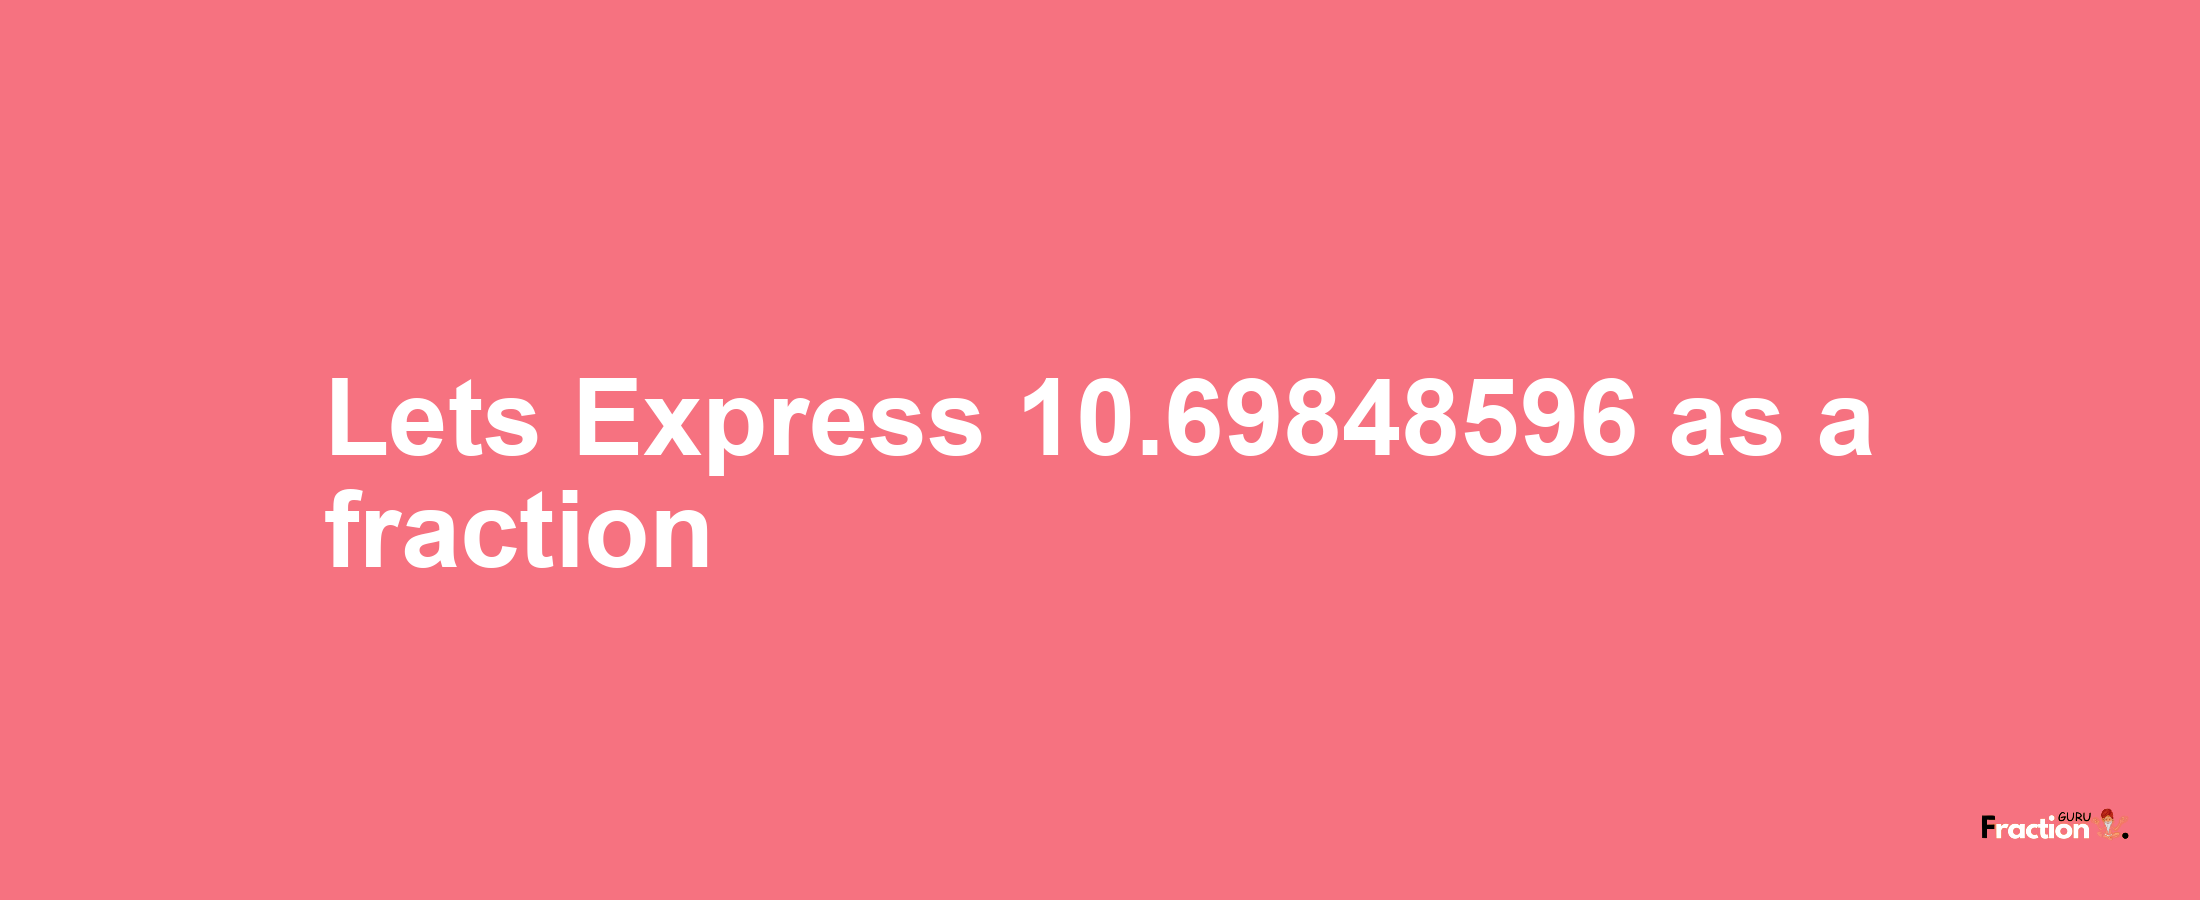 Lets Express 10.69848596 as afraction